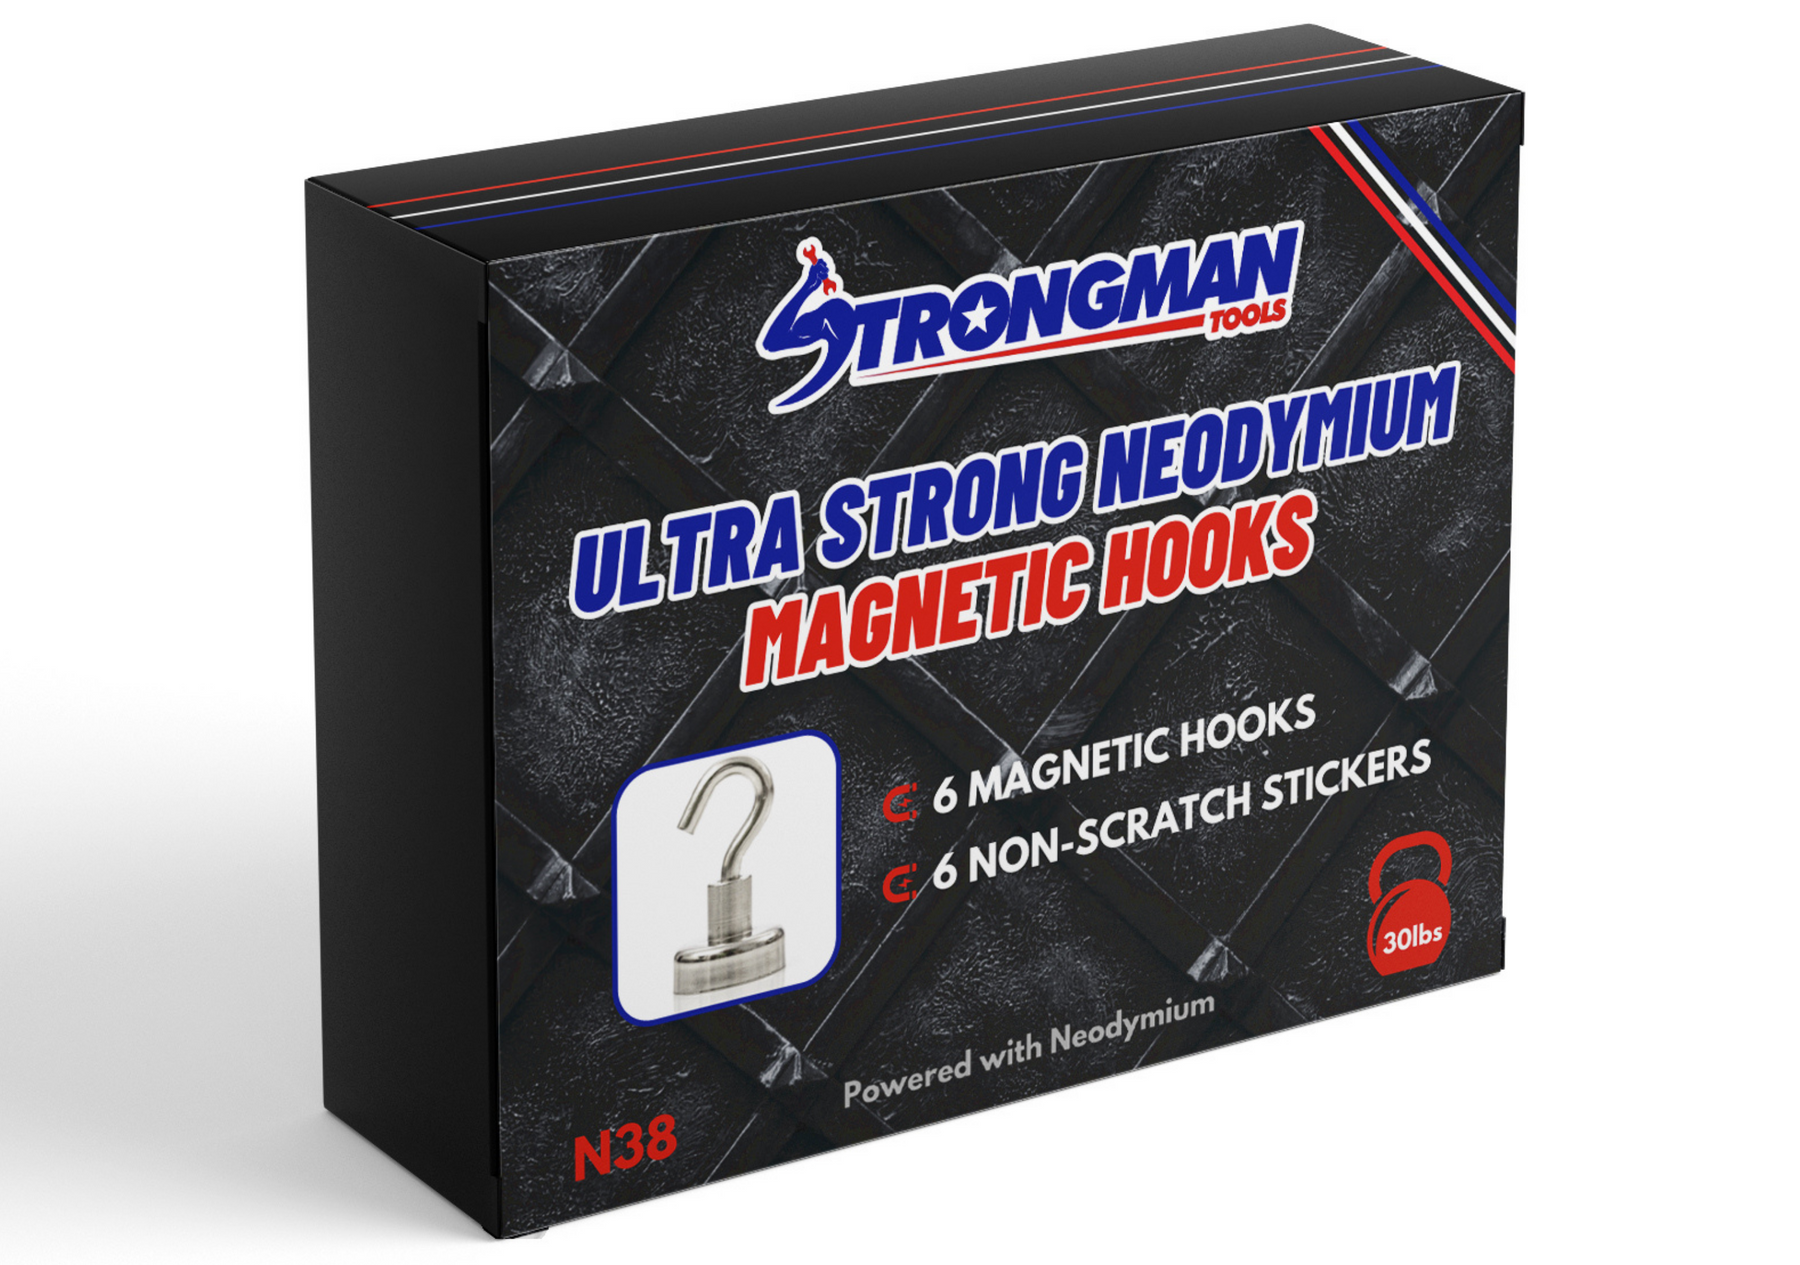 Strongman Tools Neodymium Magnetic Tape Strips, 2 Pack, 2100Gs Super Strong Hold Power, with Genuine Neodymium Powder, 12X1X0.08